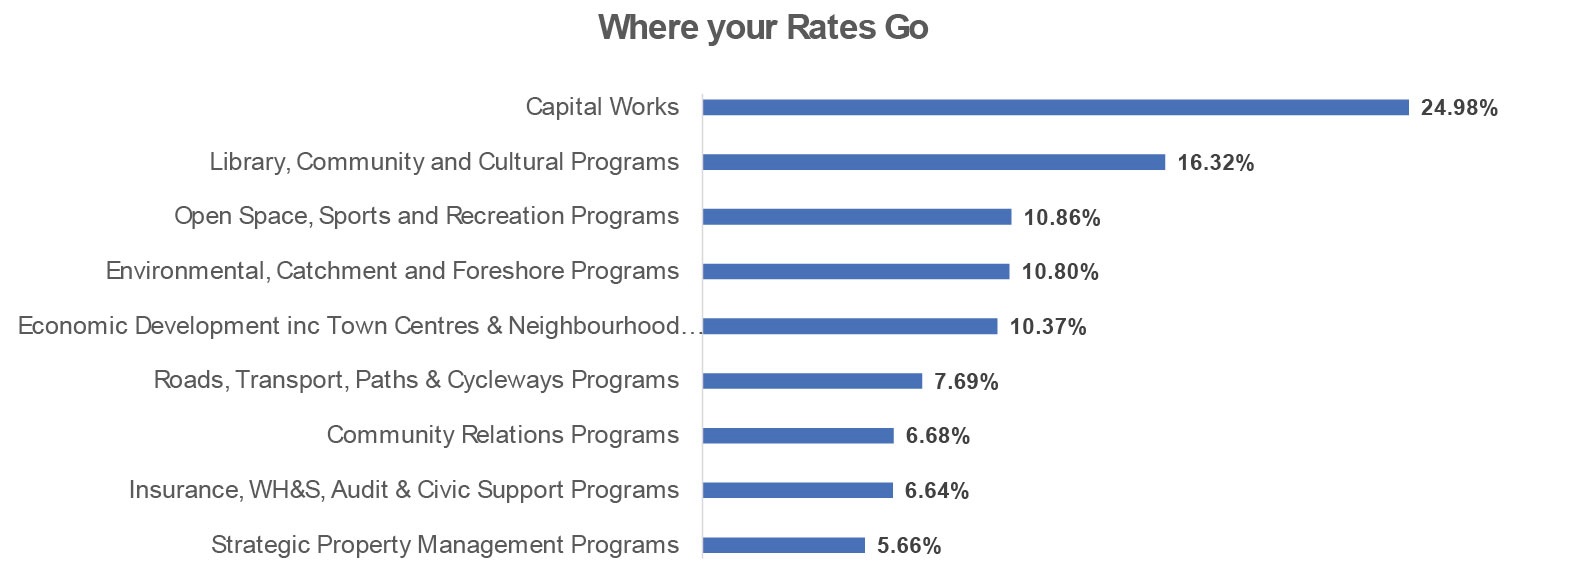 Where-your-rates-go-chart.jpg